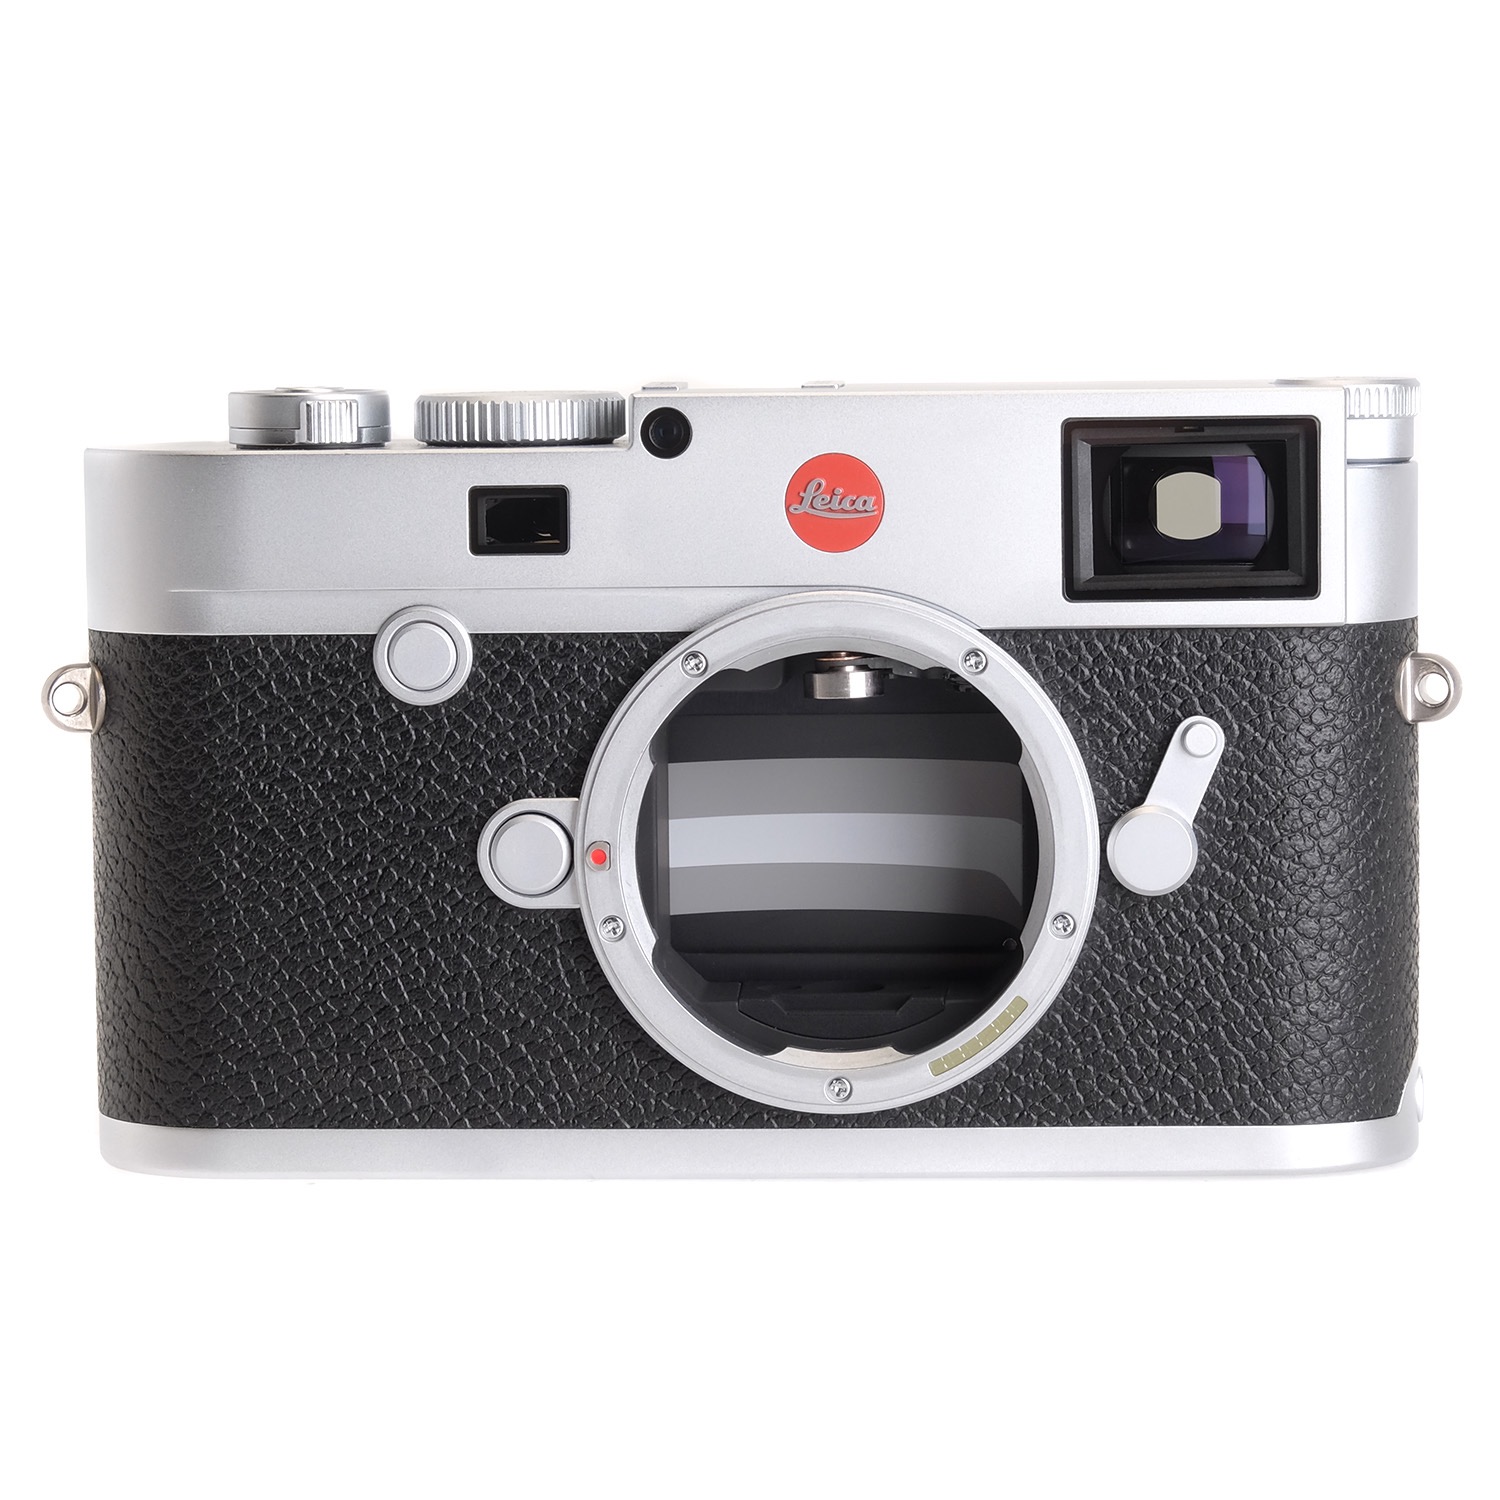 Leica Used Products | Camera West